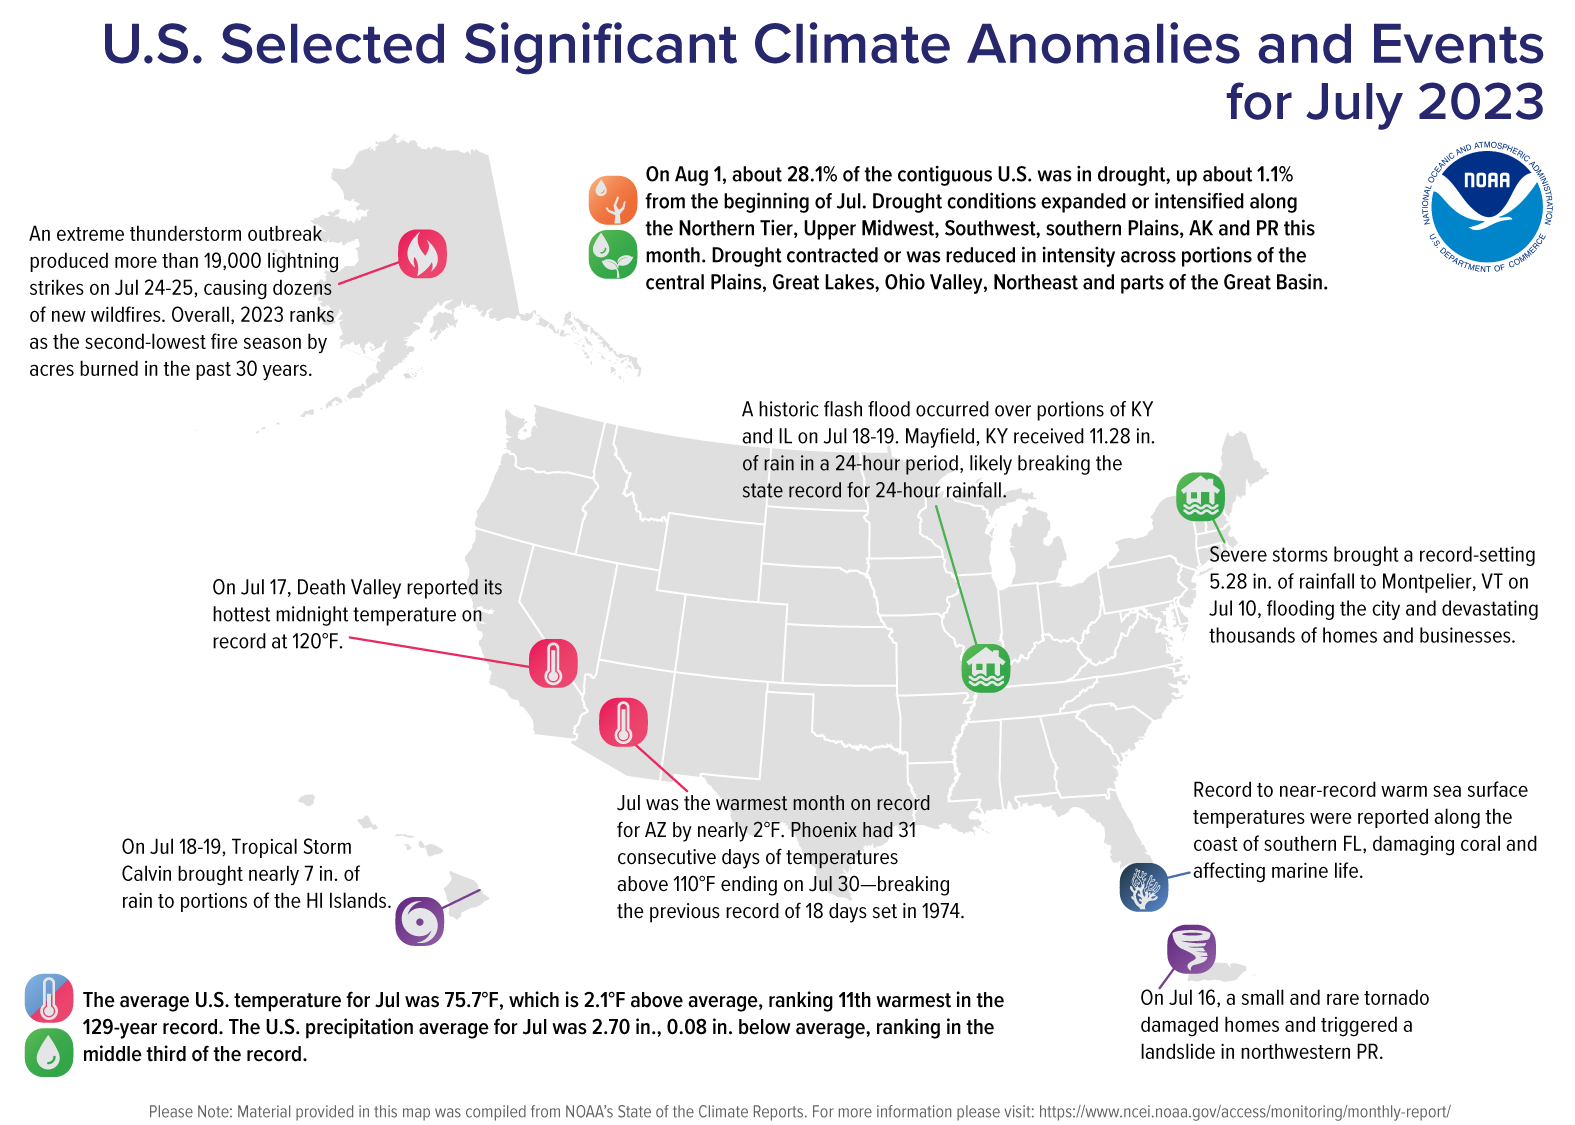 A map of the U.S. plotted with significant climate events that occurred during July 2023. Please see article text below as well as the full climate report highlights at http://bit.ly/USClimate202307.